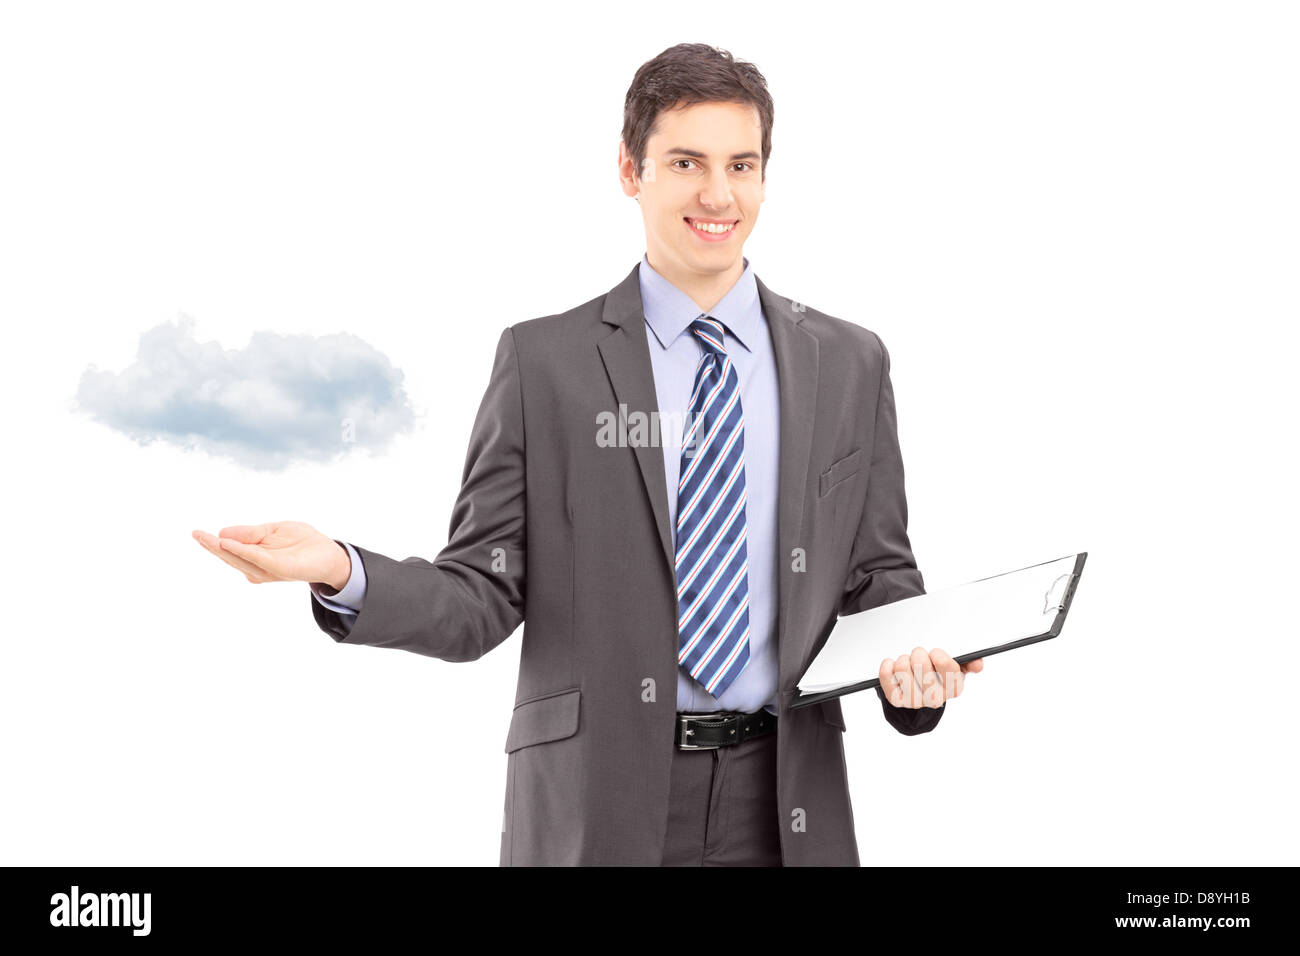 Young professional man holding a clipboard and gesturing with hand, symbolizing cloud computing, isolated on white background Stock Photo